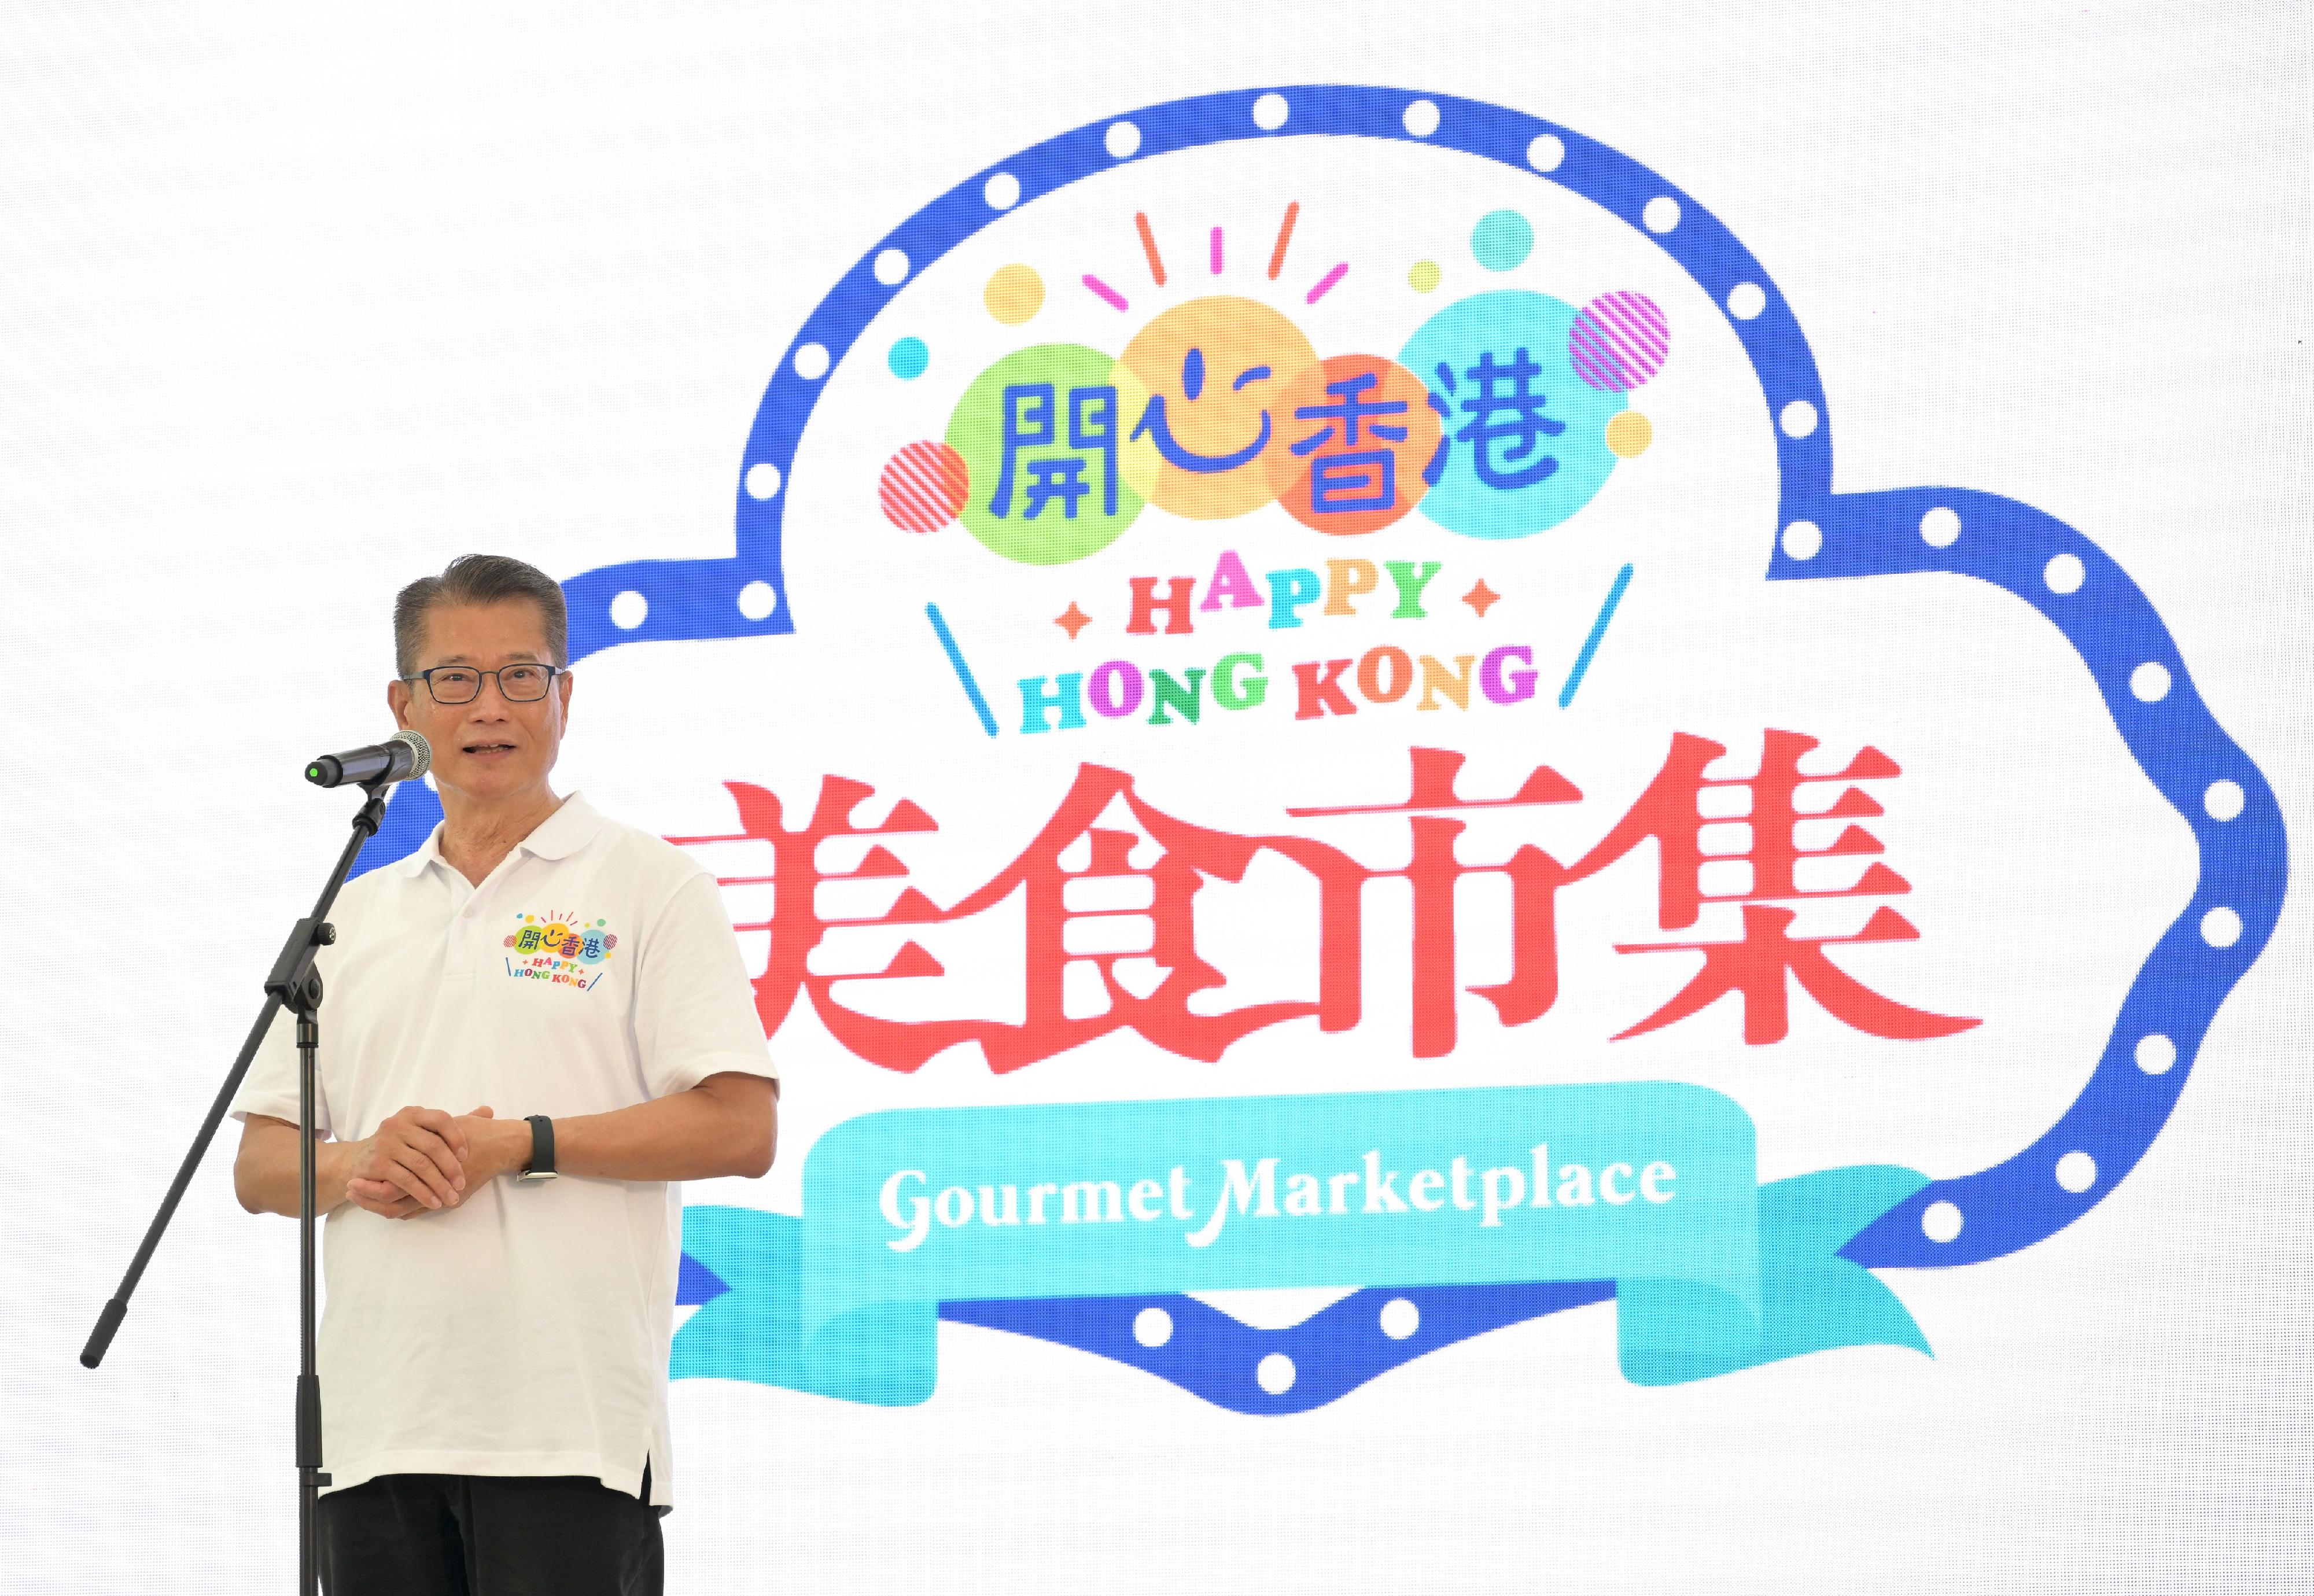 The Financial Secretary, Mr Paul Chan, speaks at the opening ceremony of the second "Happy Hong Kong" Gourmet Marketplace today (May 6).